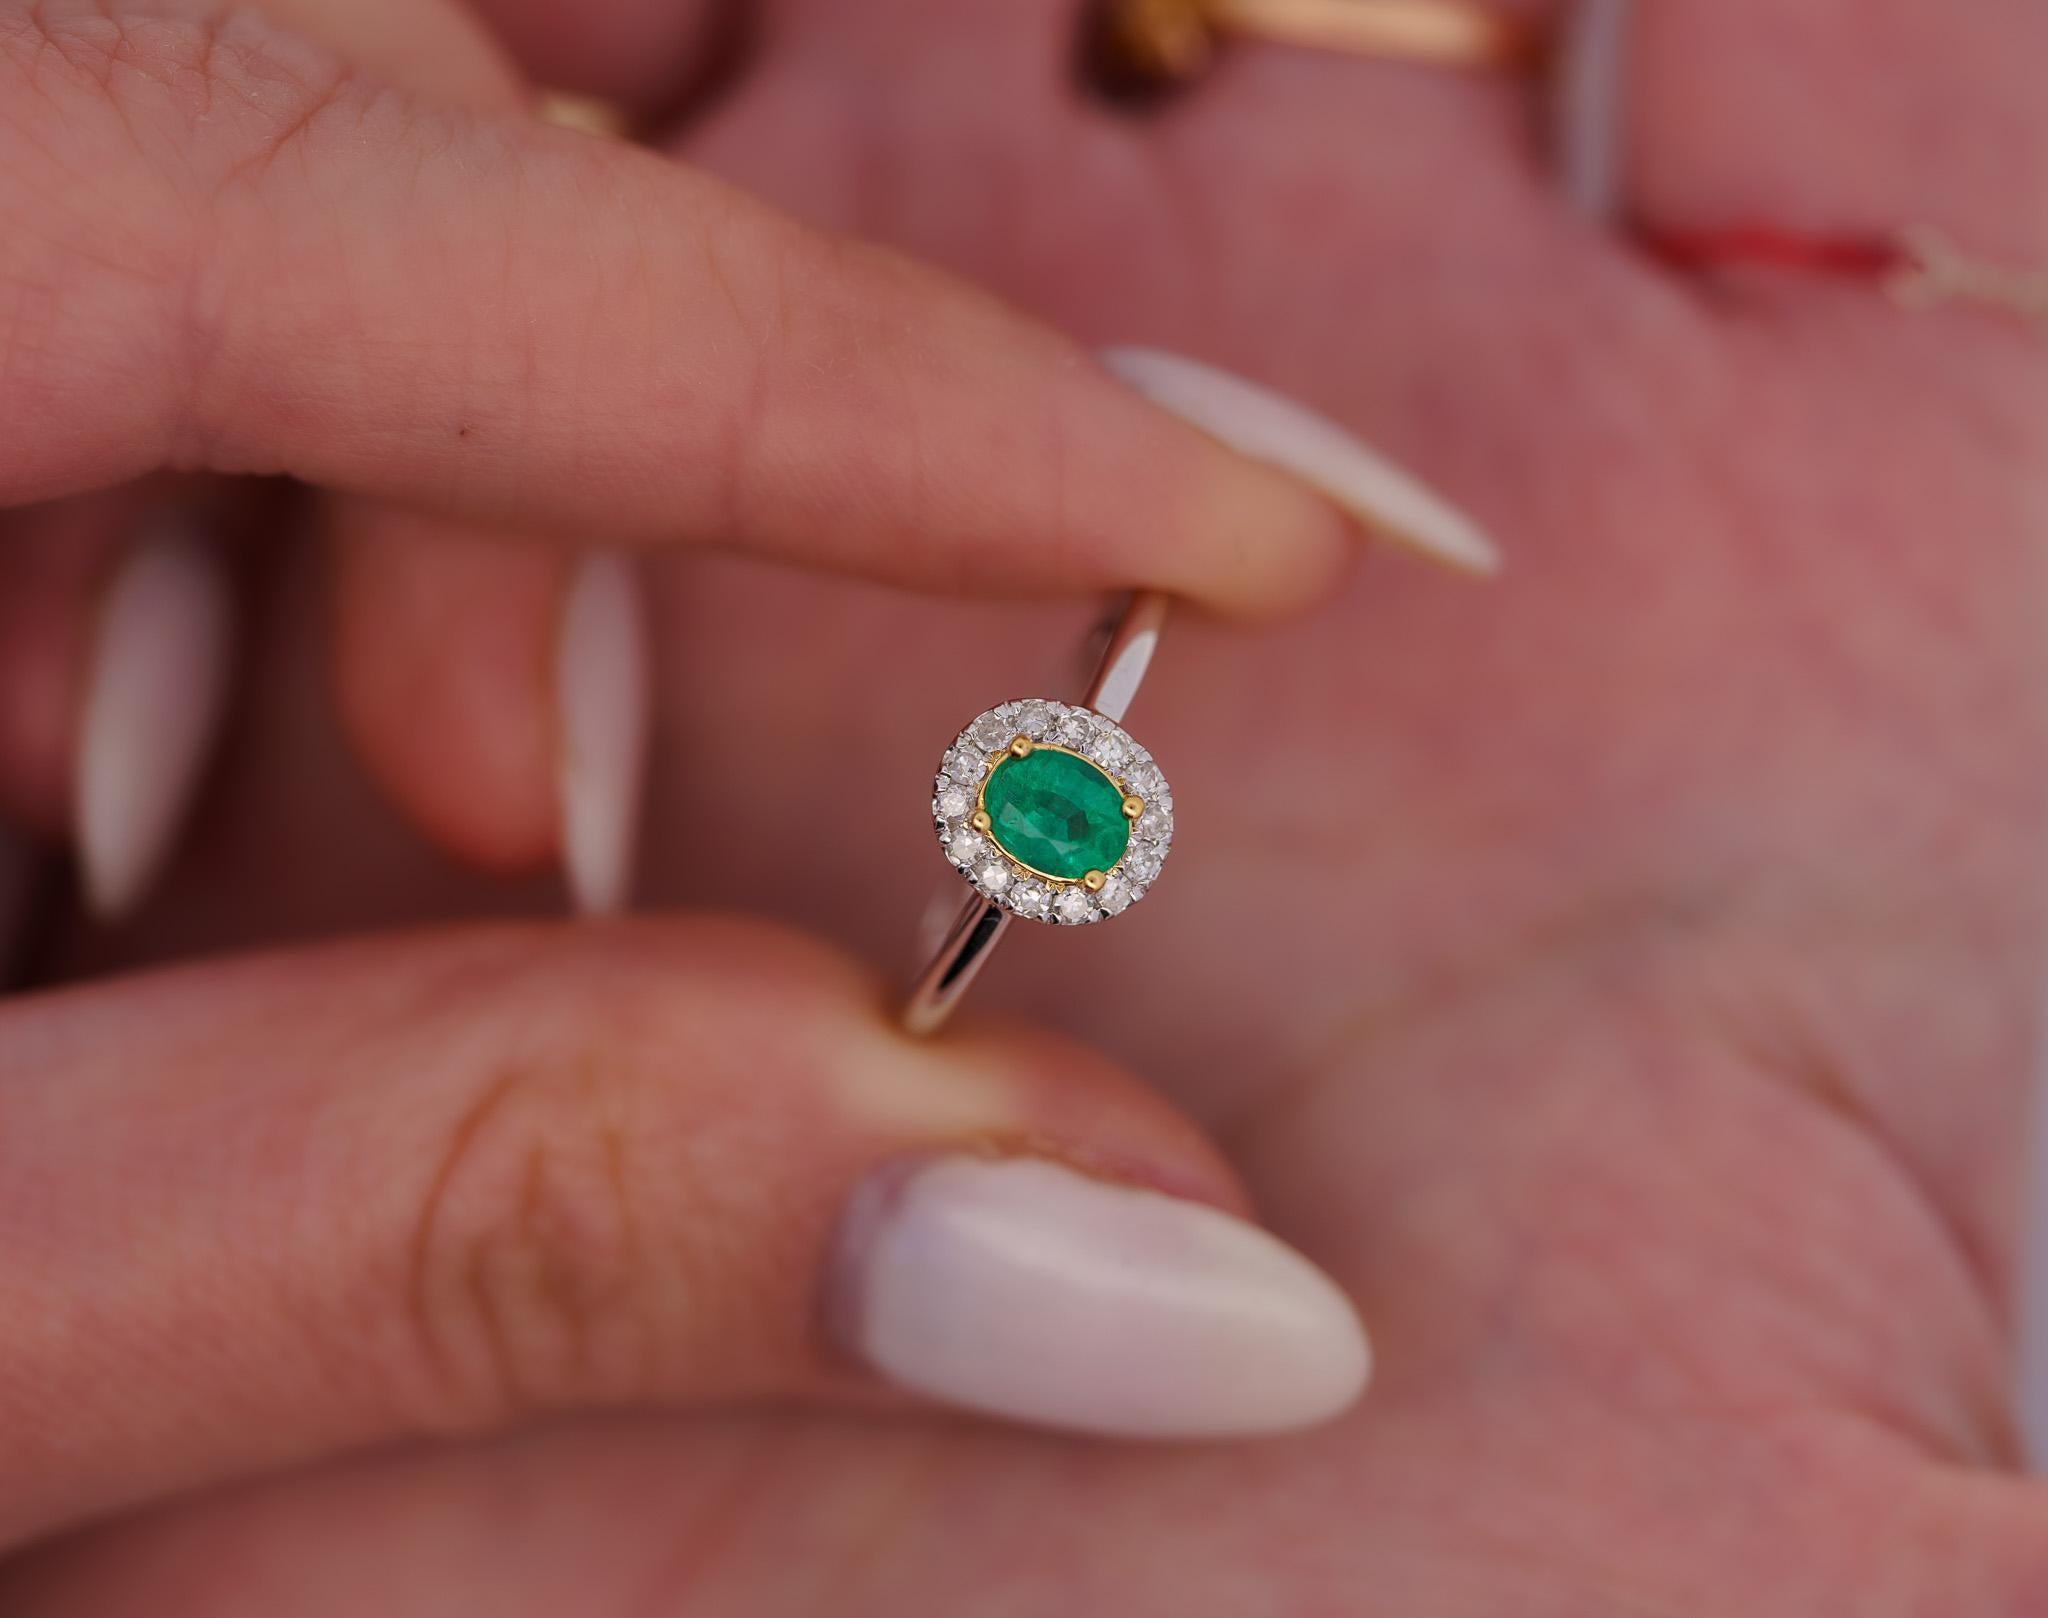 Natural Oval Cut Emerald and Diamond Halo Ring, Set in 18K Solid White Gold. The perfect natural gemstone emerald ring that won't break the bank.

Featuring a rich oval cut green natural Emerald and round cut diamond side stones that form a halo.